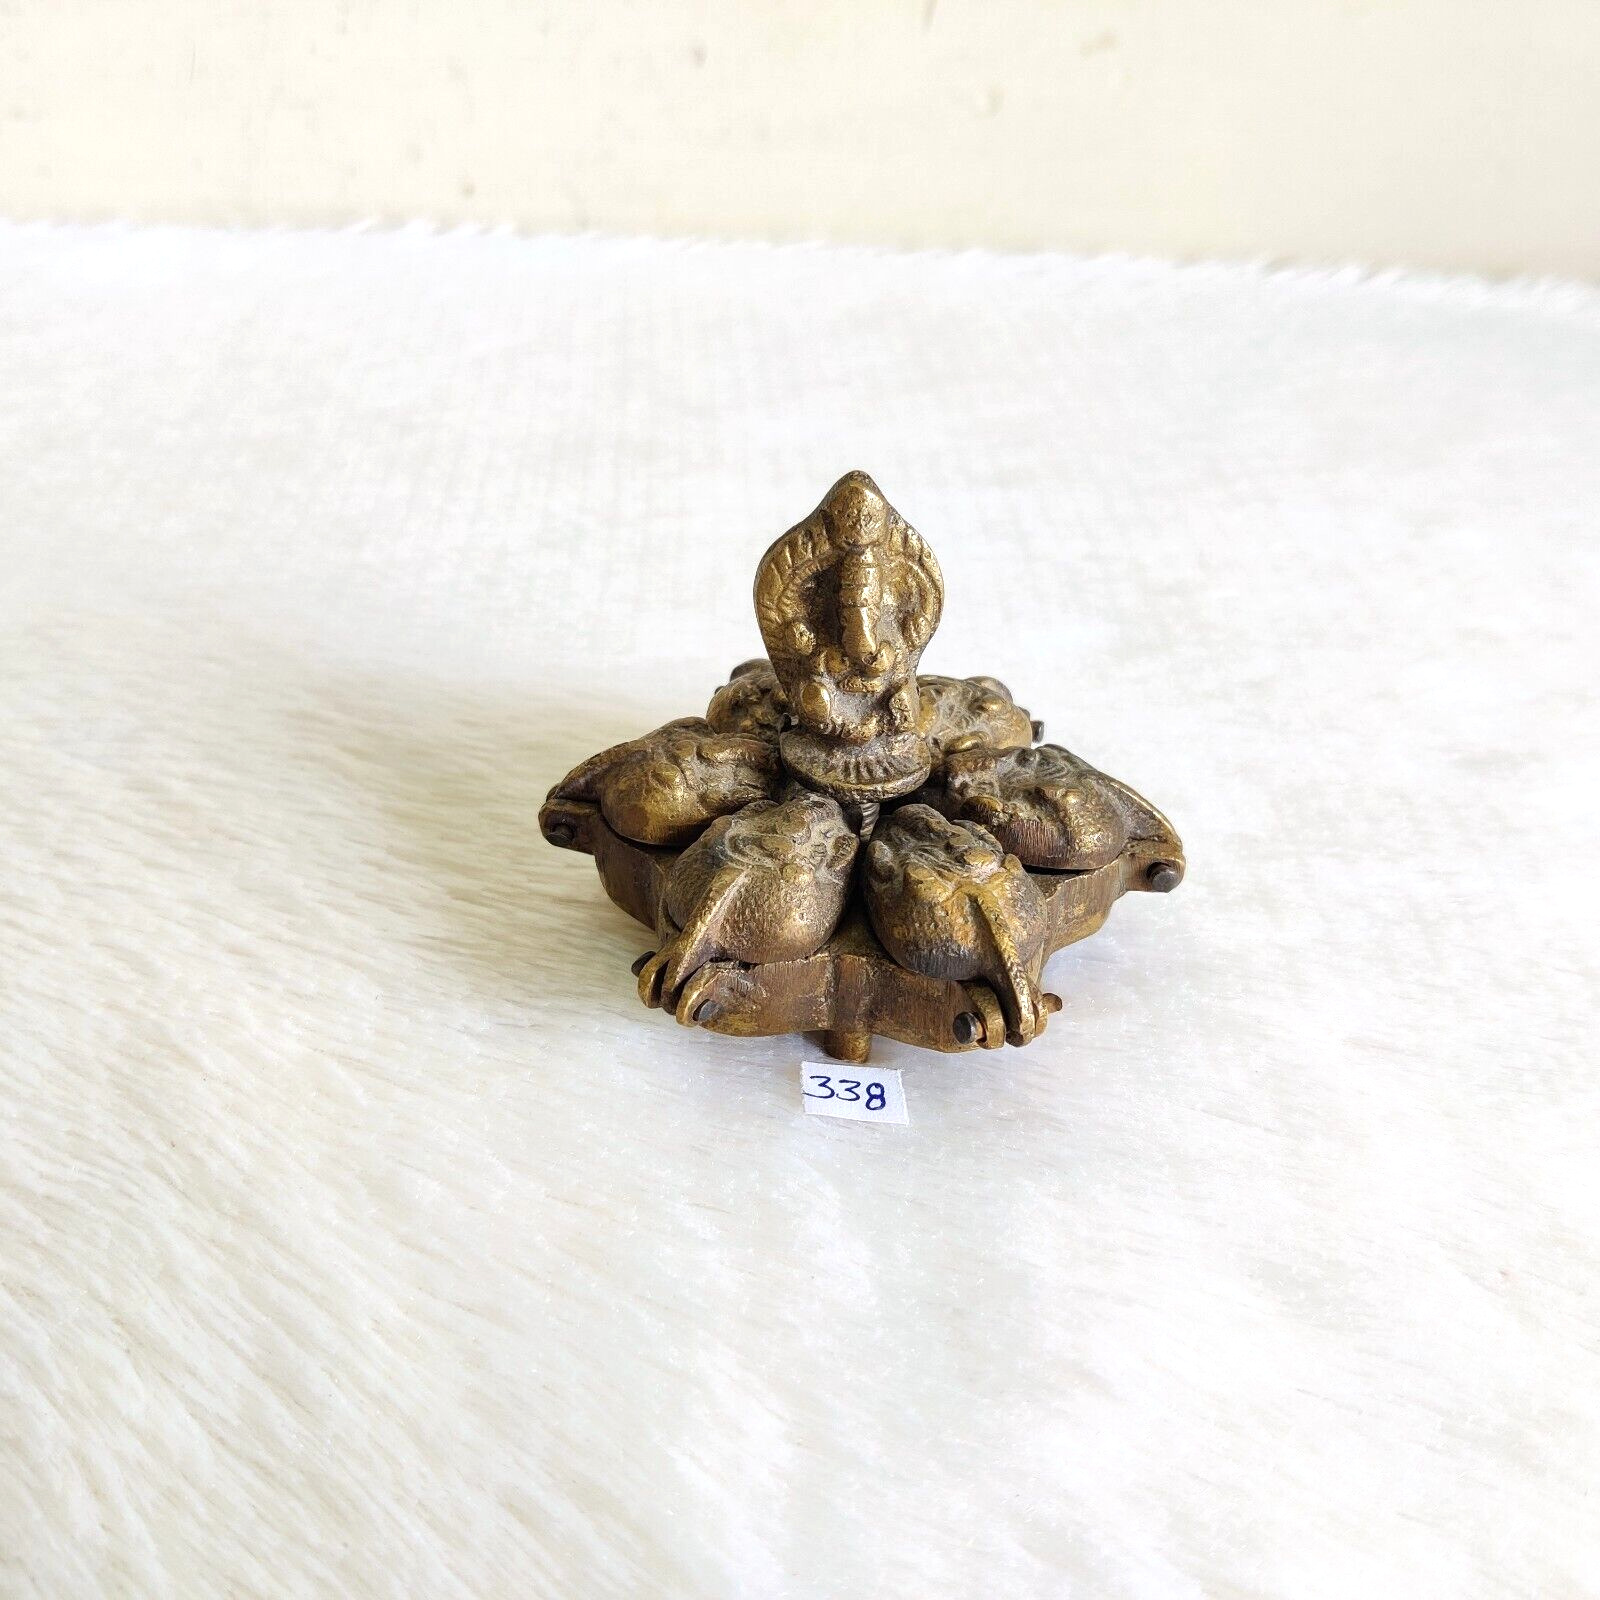 1930s Vintage Brass Handcrafted Lord Ganesha Small 6 In 1 Oil Lamp Rare 338